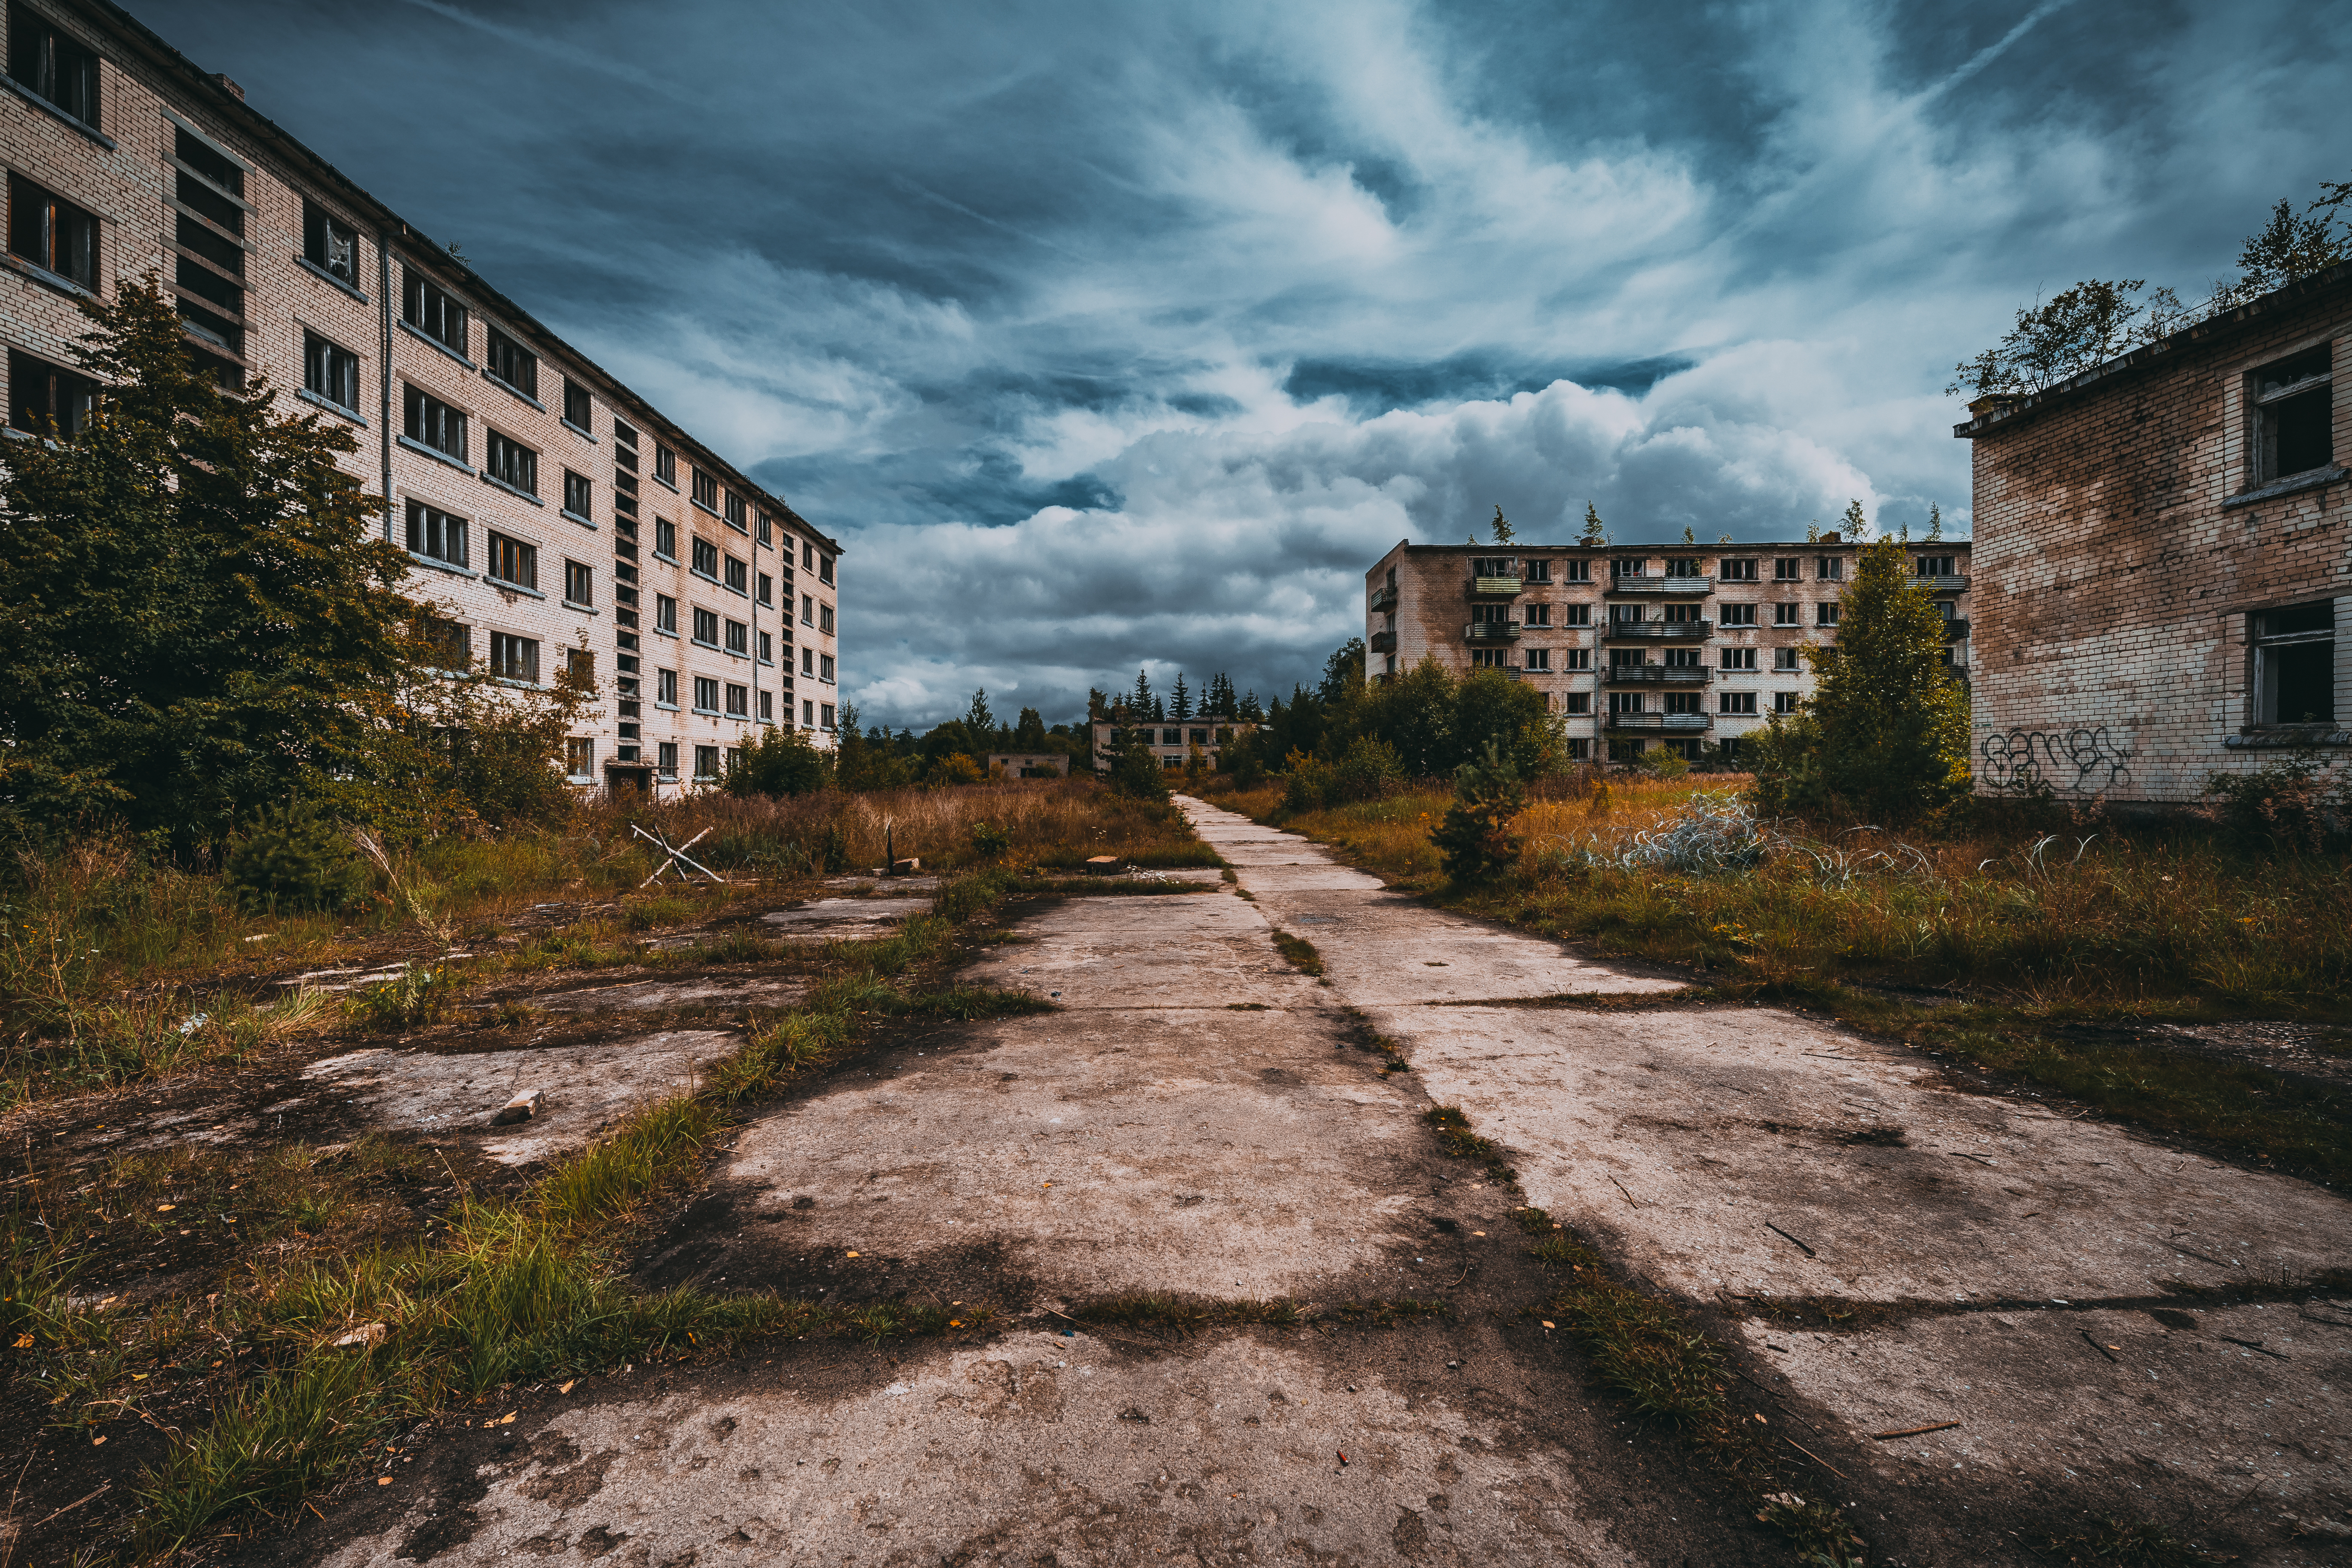 Abandoned ghost town. | Source: Shutterstock